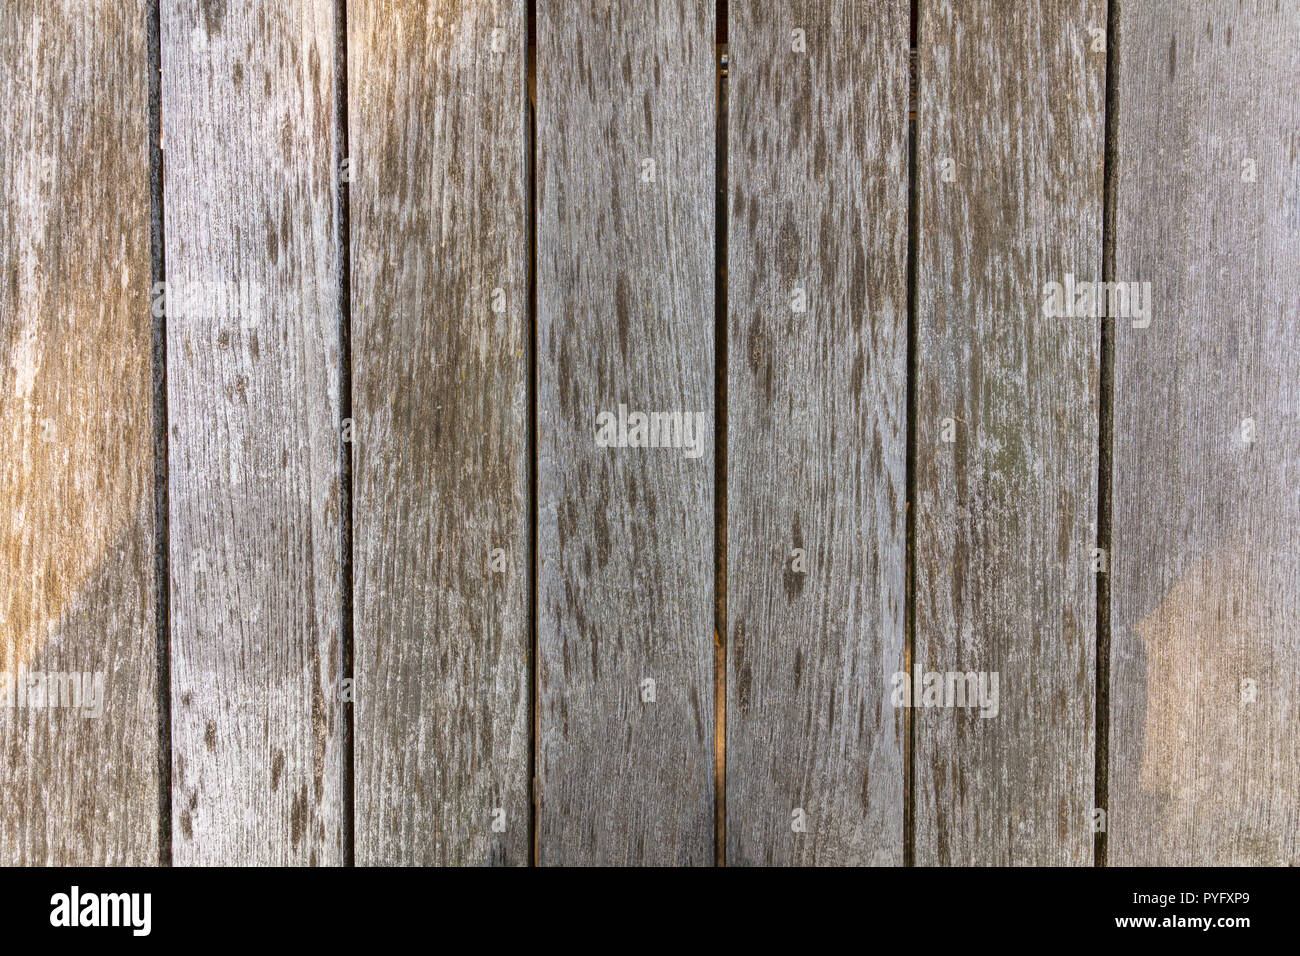 Wooden vertical planks background, texture. Wooden floor or wall Stock Photo